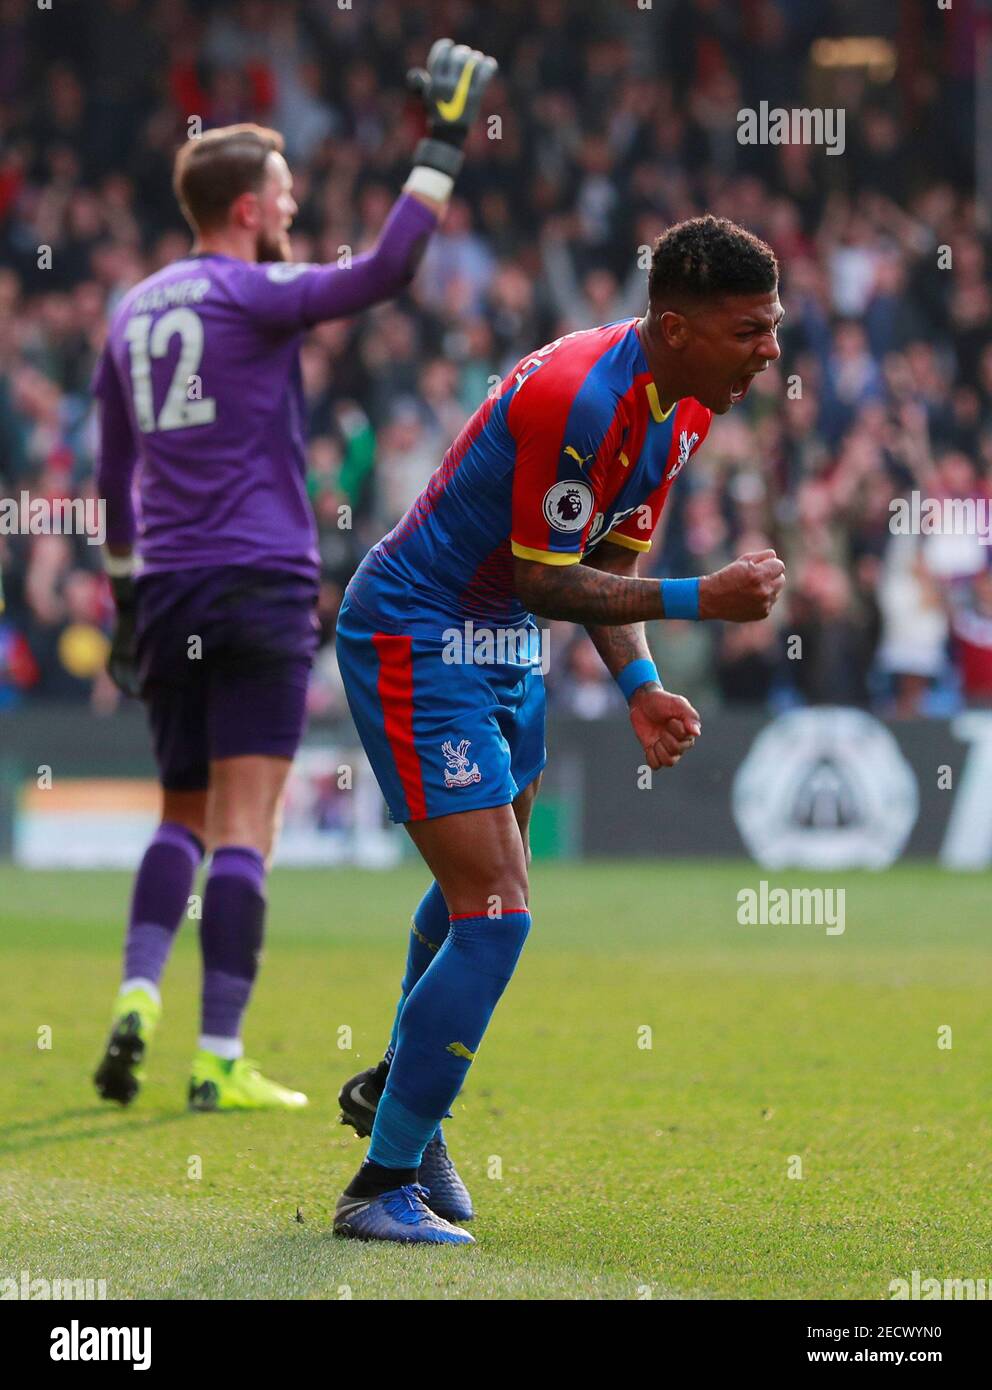 Soccer Football - Premier League - Crystal Palace v Huddersfield Town - Selhurst Park, London, Britain - March 30, 2019  Crystal Palace's Patrick van Aanholt celebrates scoring their second goal    Action Images via Reuters/Andrew Couldridge  EDITORIAL USE ONLY. No use with unauthorized audio, video, data, fixture lists, club/league logos or 'live' services. Online in-match use limited to 75 images, no video emulation. No use in betting, games or single club/league/player publications.  Please contact your account representative for further details. Stock Photo